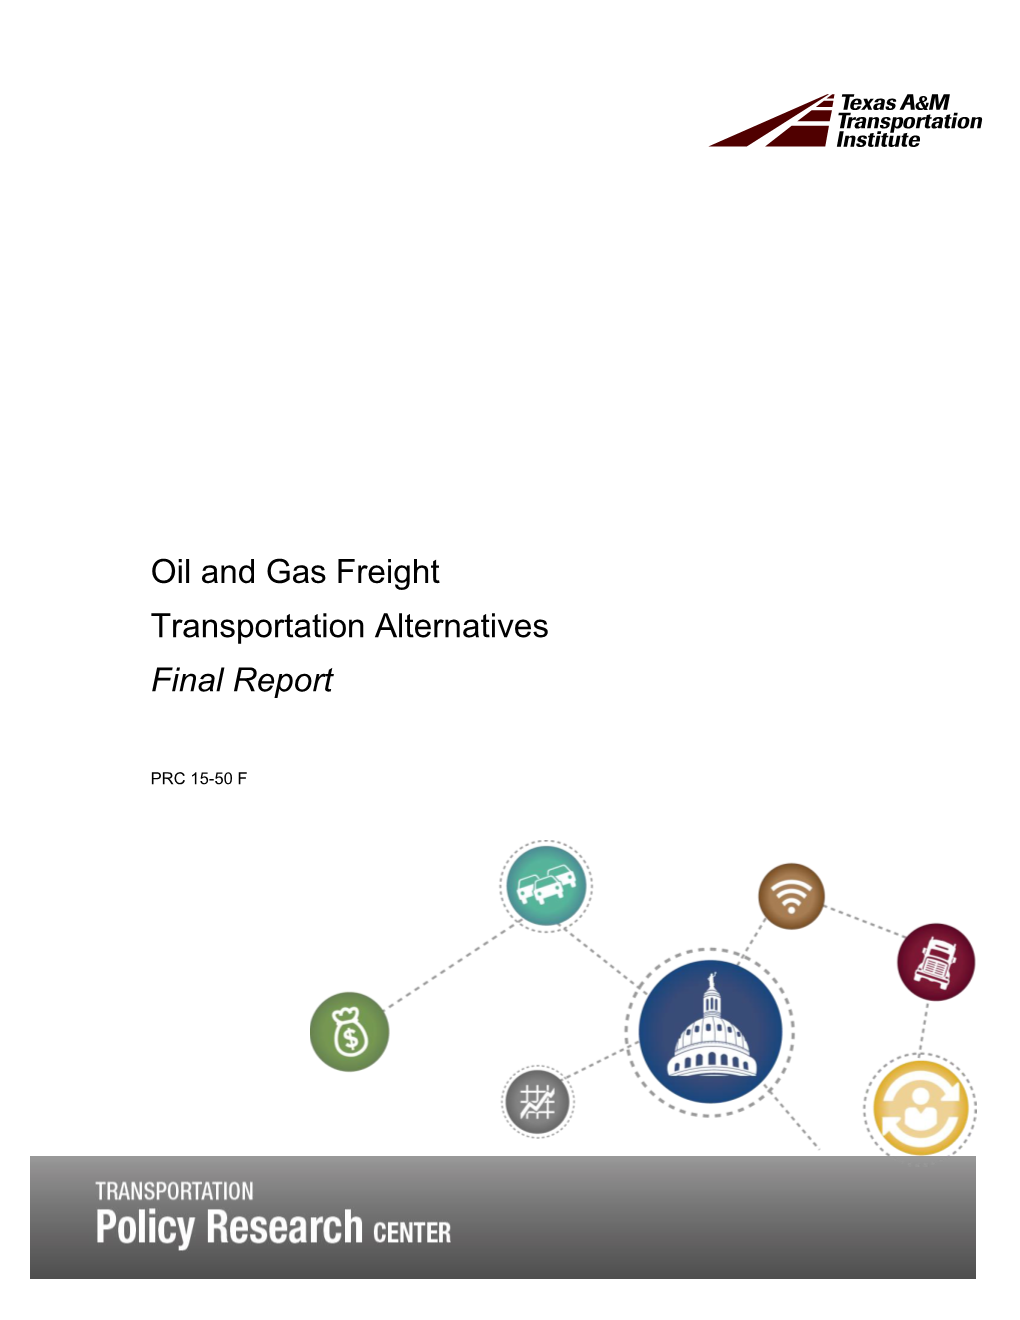 Oil and Gas Freight Transportation Alternatives Final Report